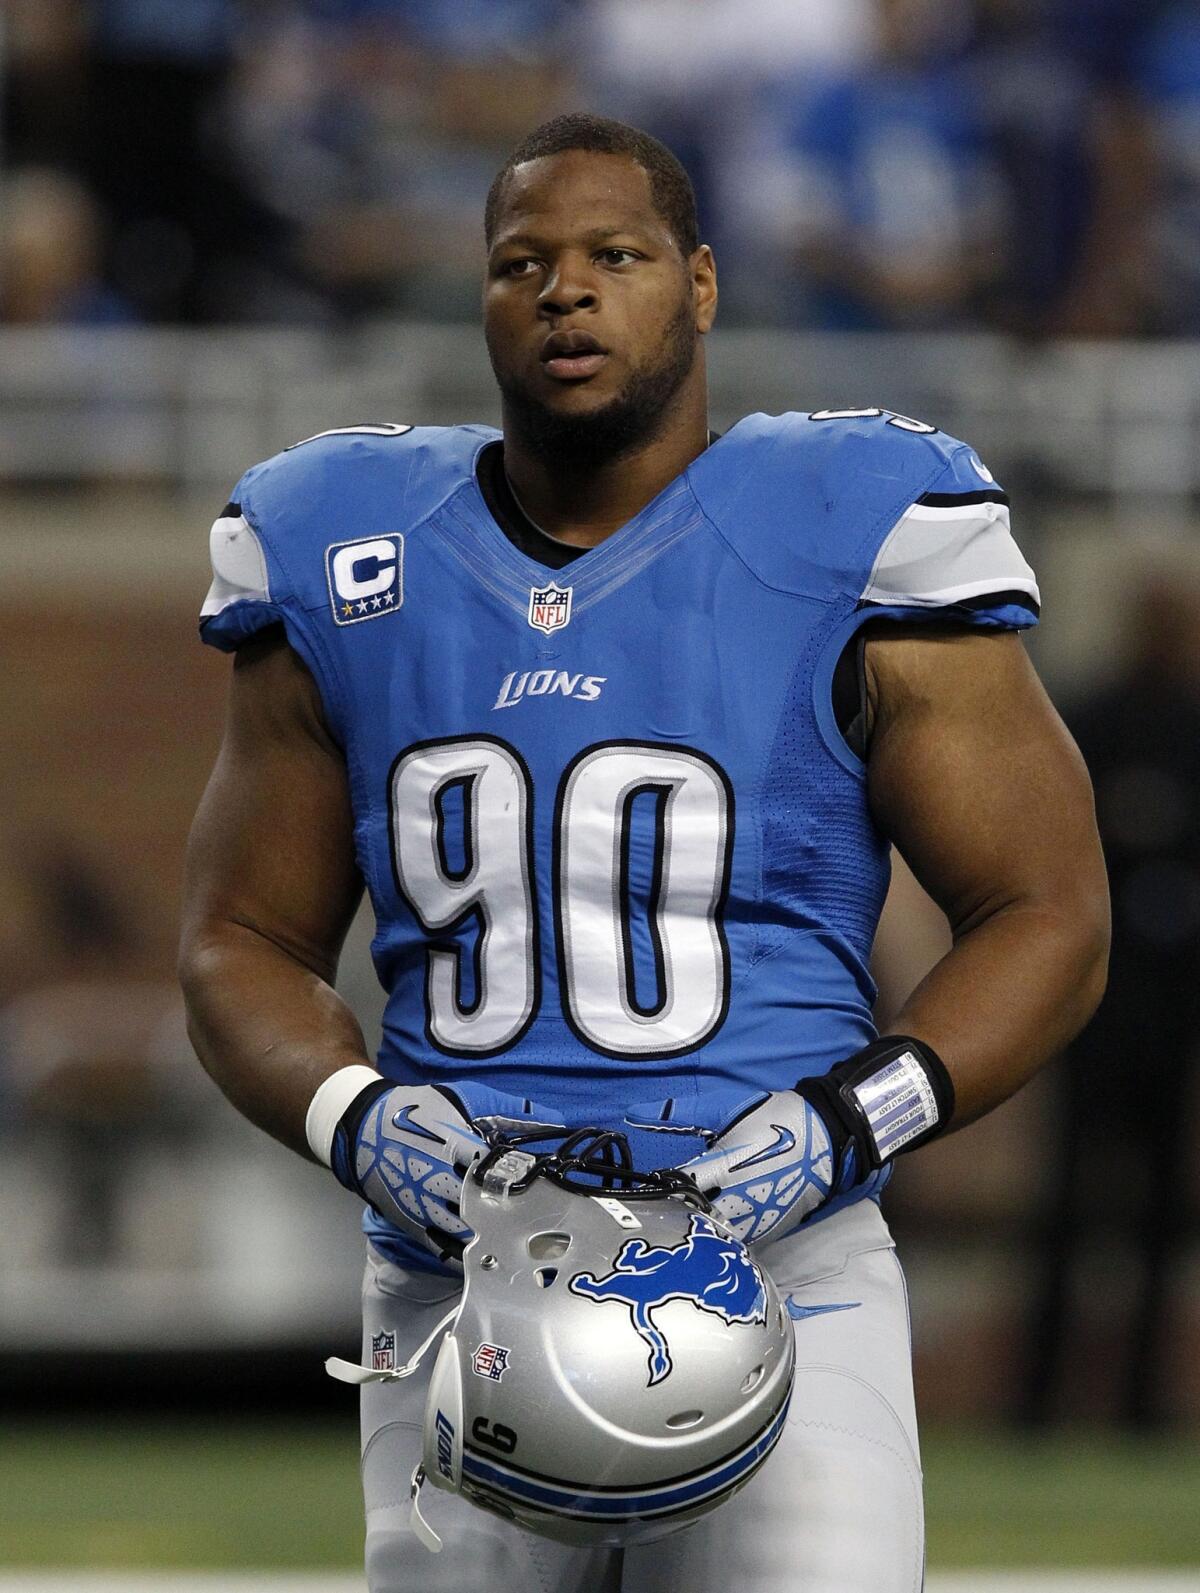 Detroit Lions defensive tackle Ndamukong Suh was fined by the NFL on Tuesday for an illegal block in the Lions' season opener.